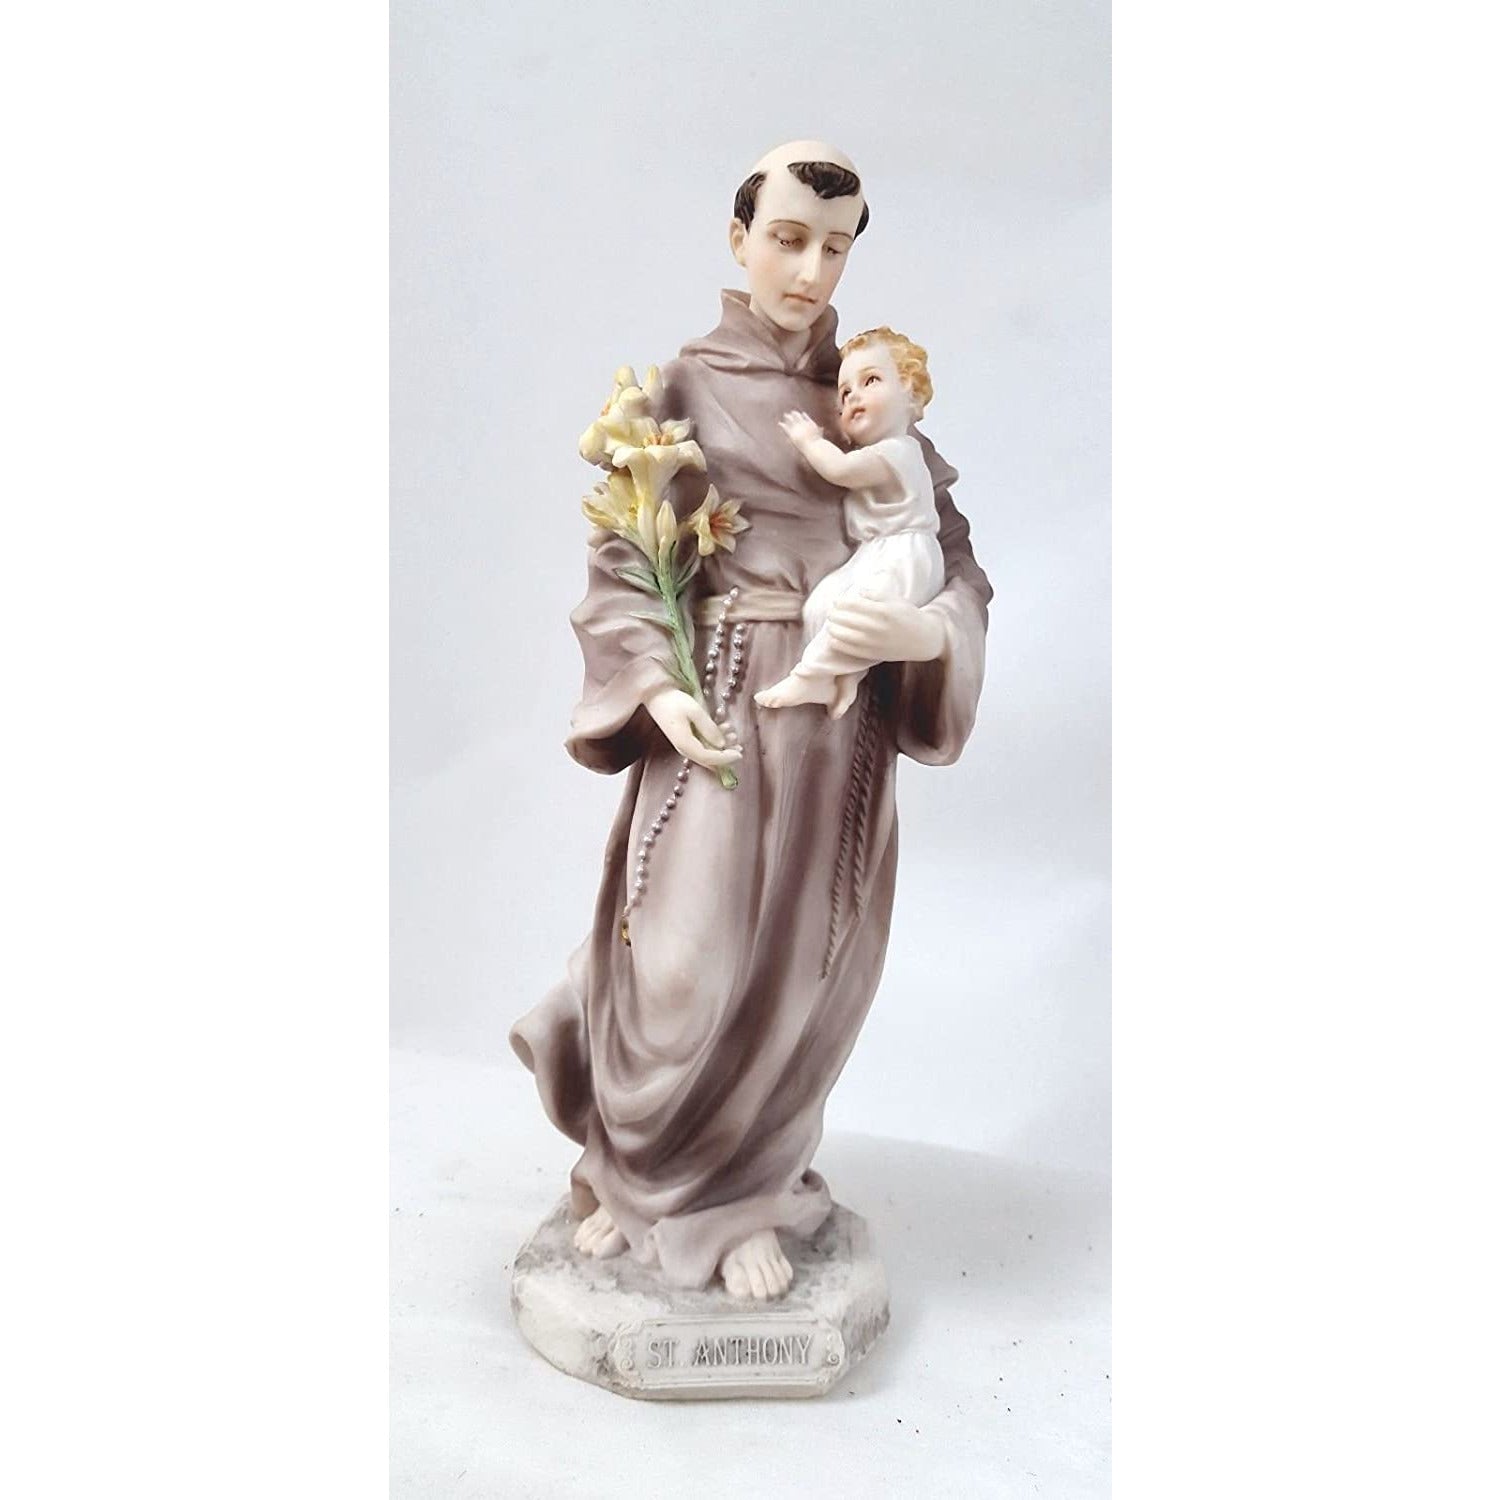 8"H Saint Anthony Figure by Roman Galleria Divina Collection